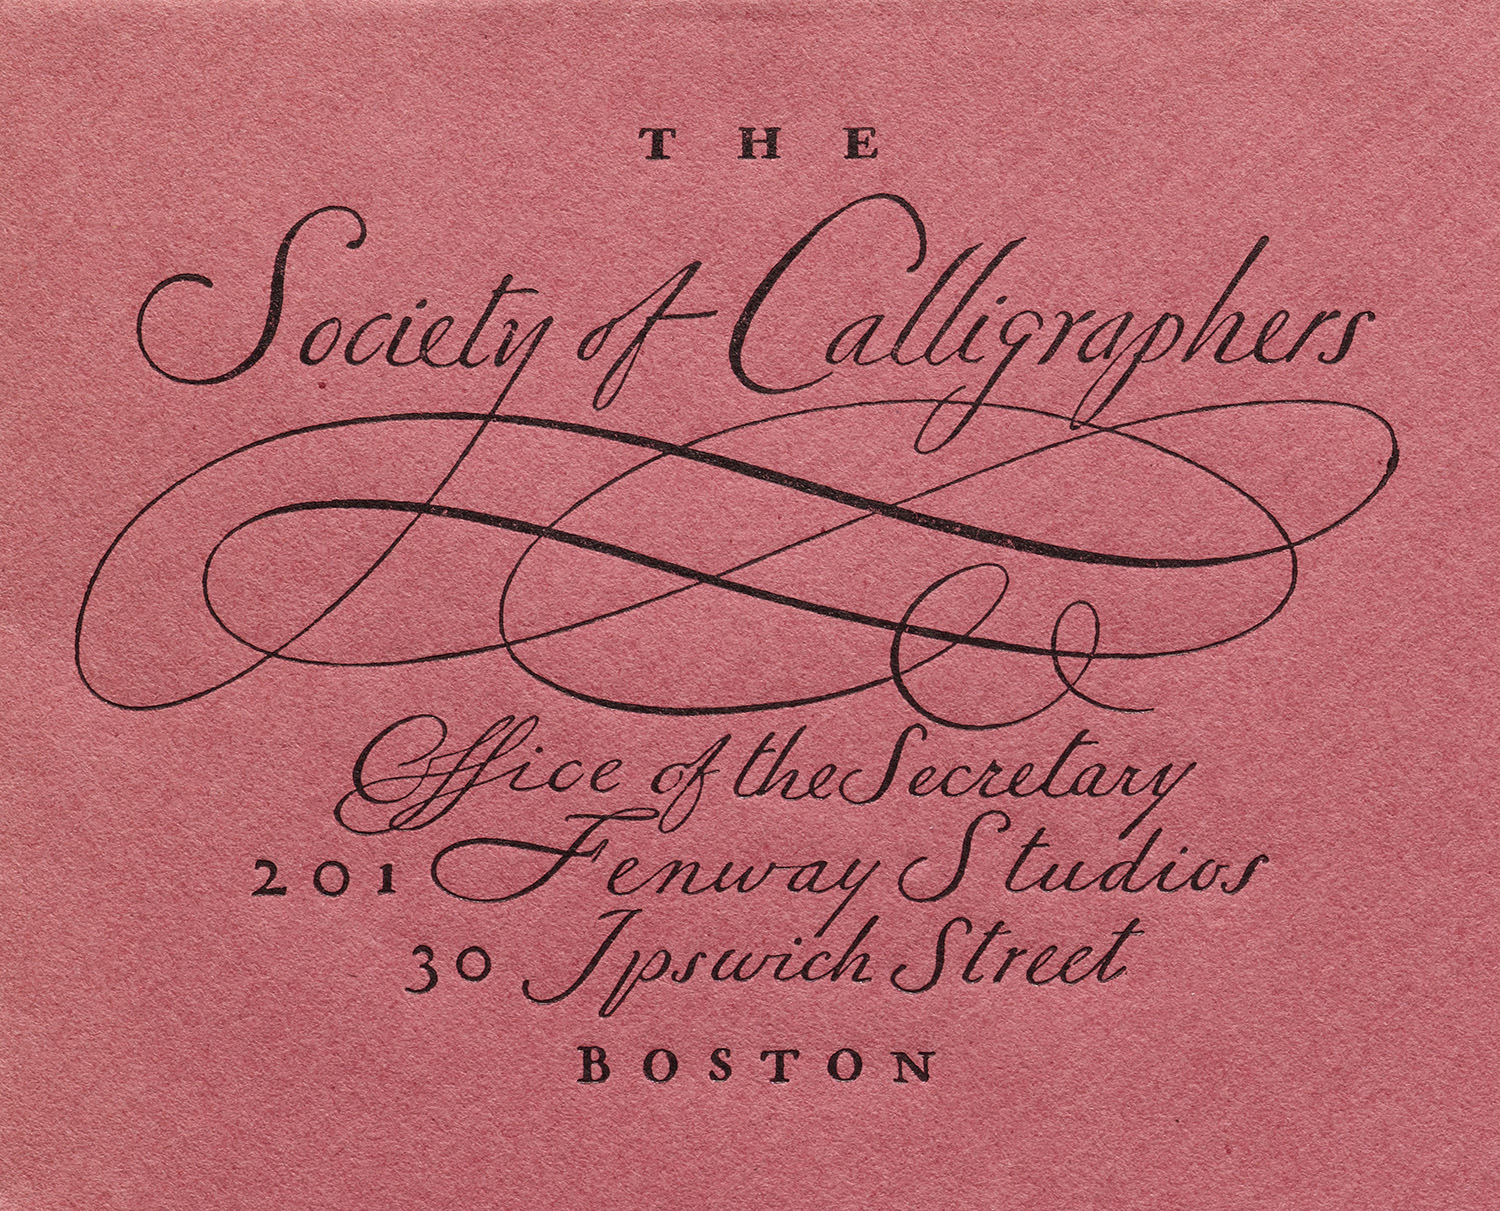 Detail of stationery for the Society of Calligraphers